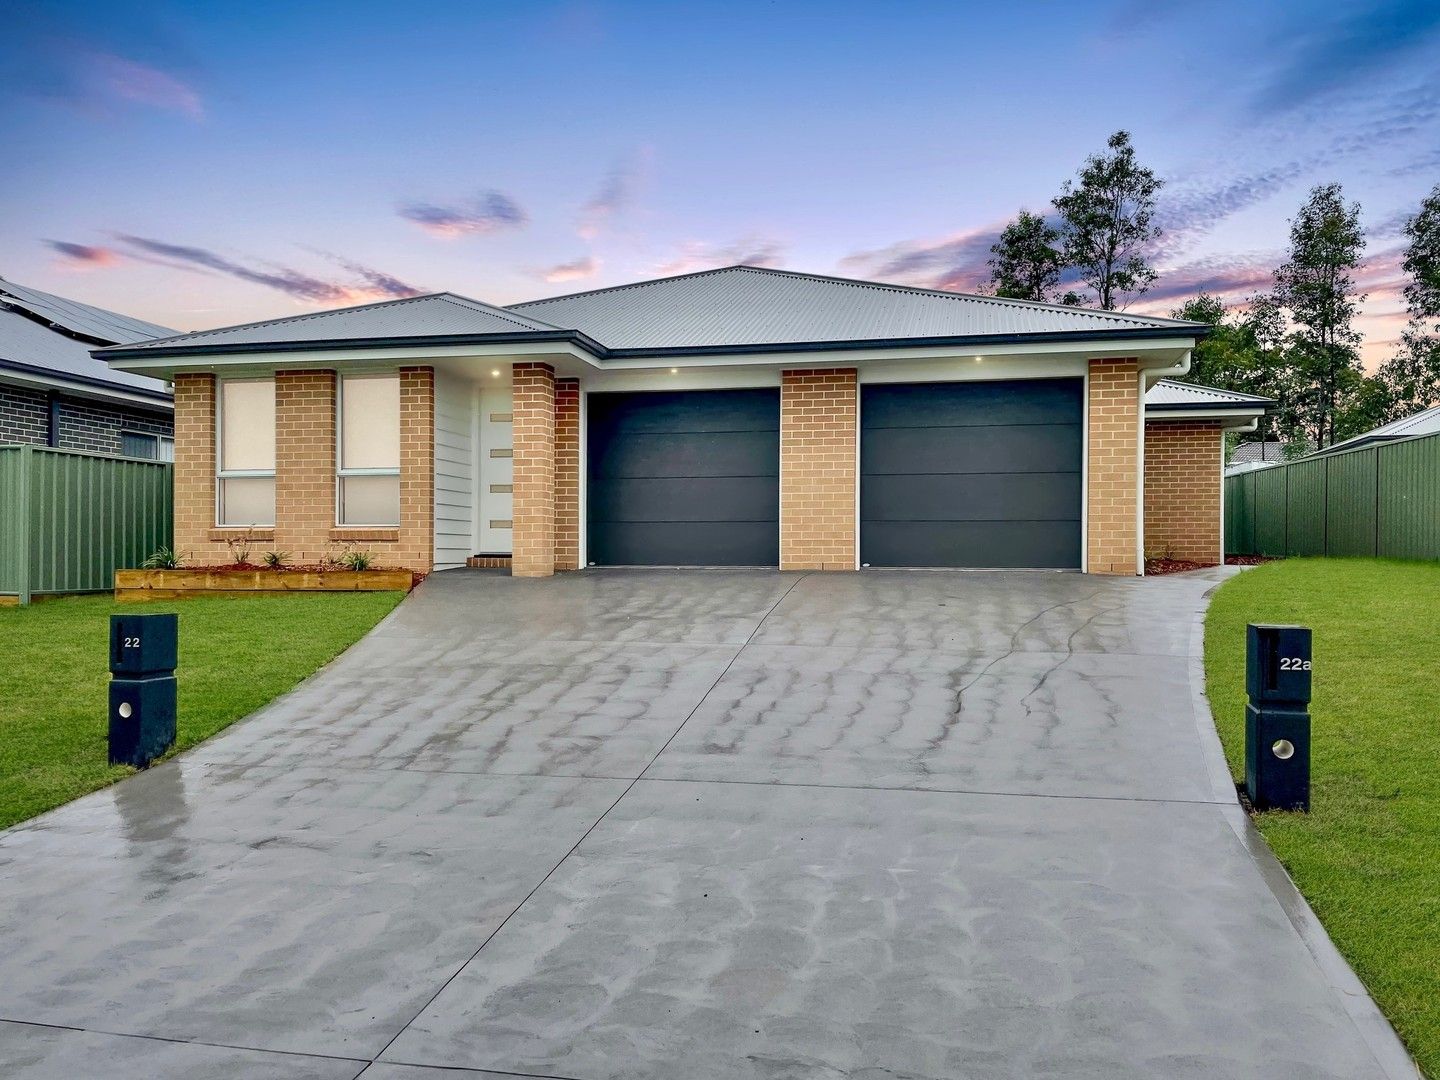 6 bedrooms Semi-Detached in 22 Adele Close NOWRA NSW, 2541